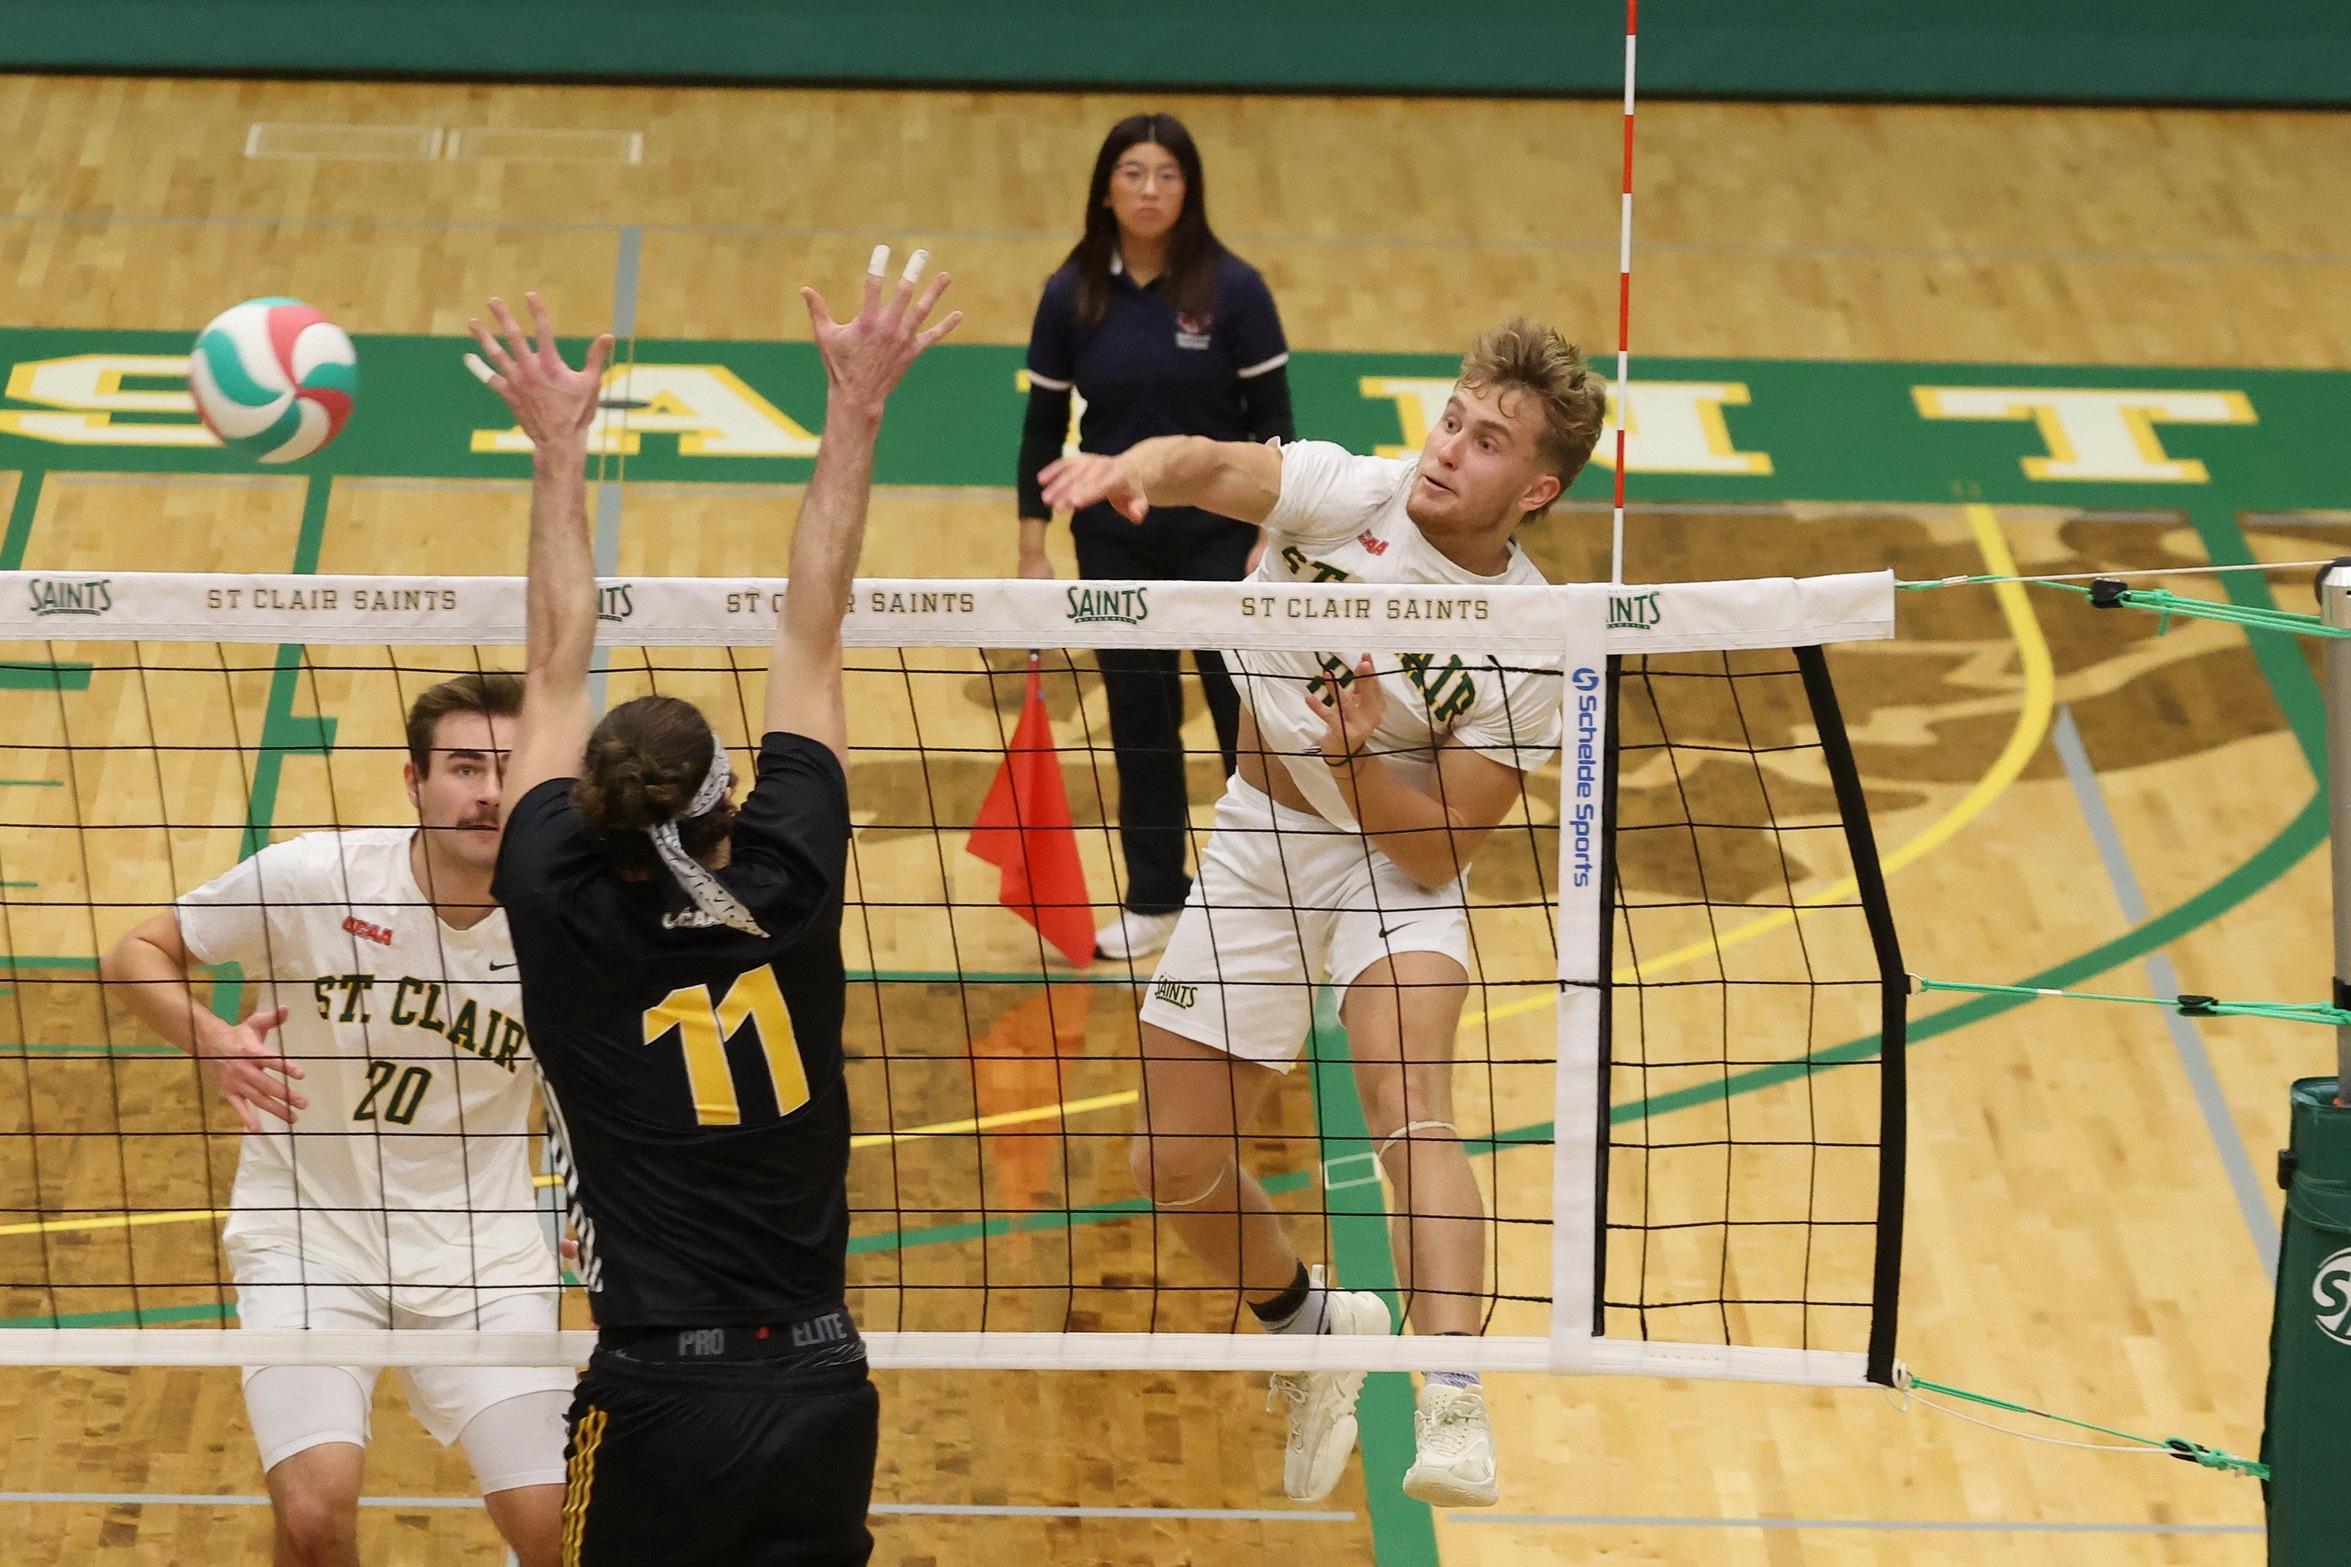 Men's Volleyball Move into First Place